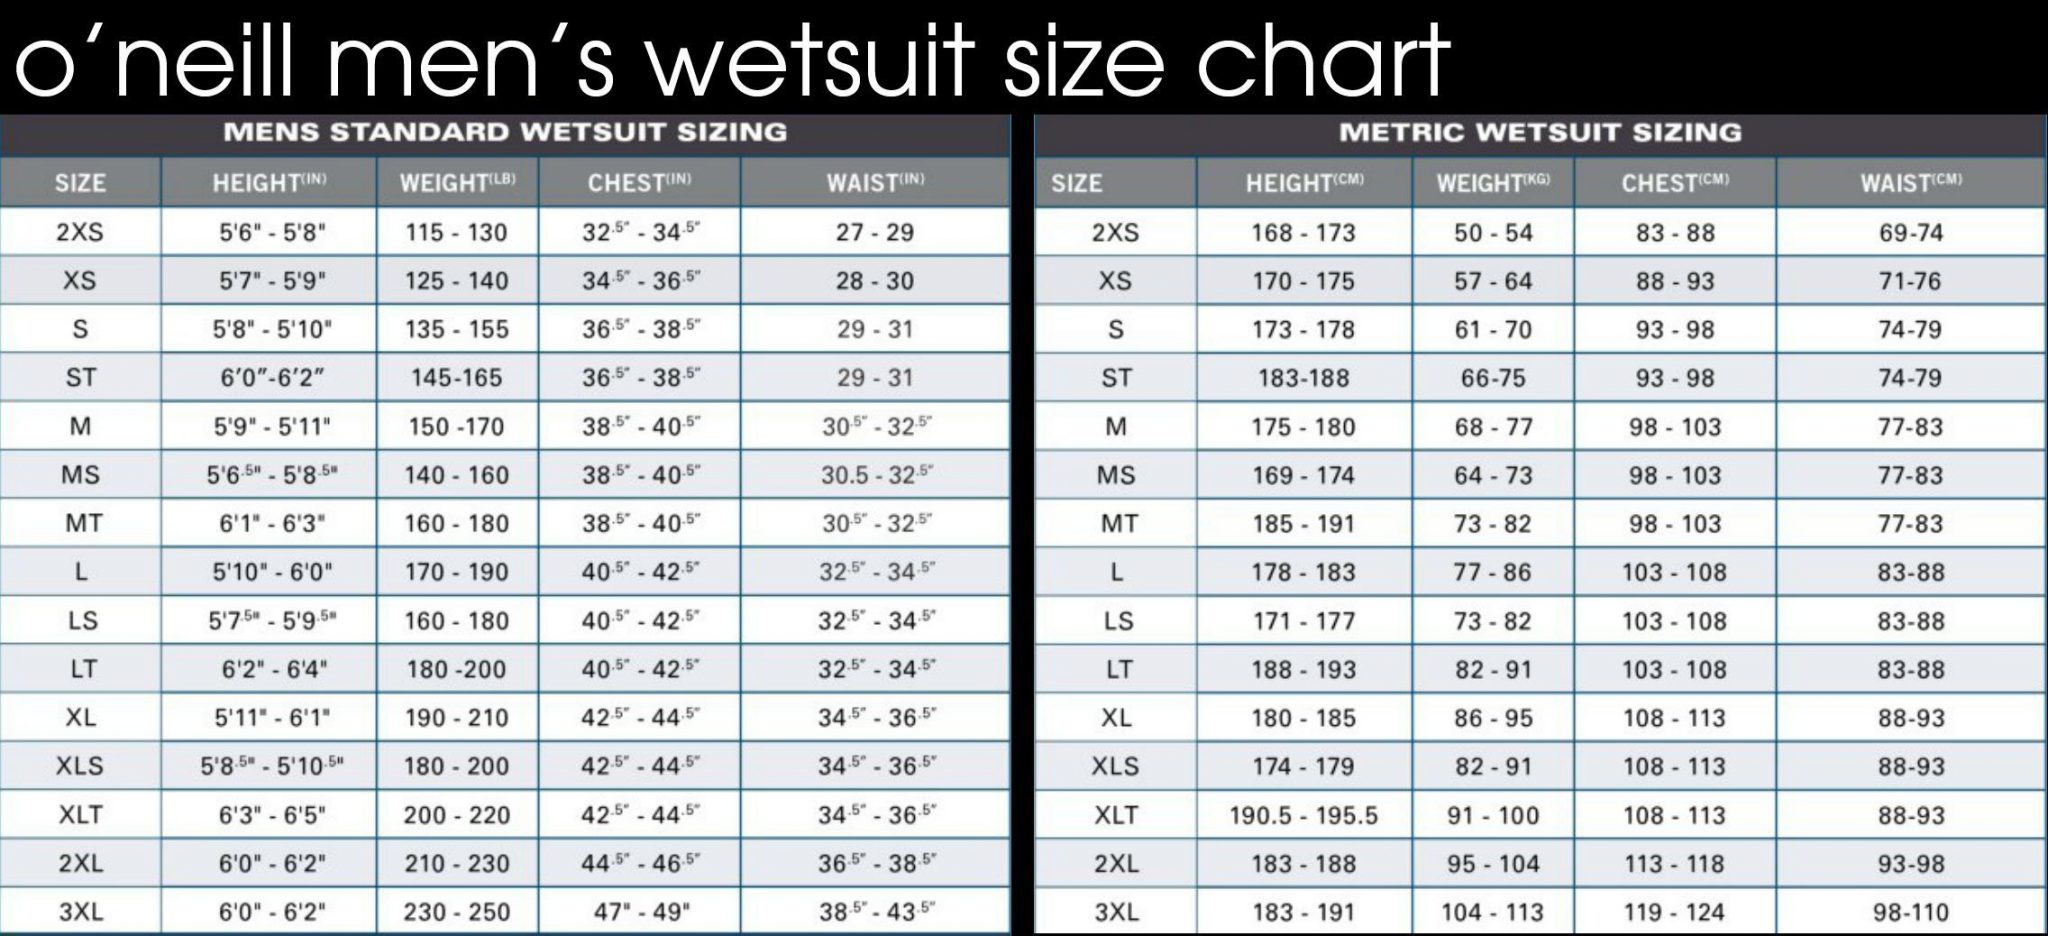 How To Size A Wetsuit For Men